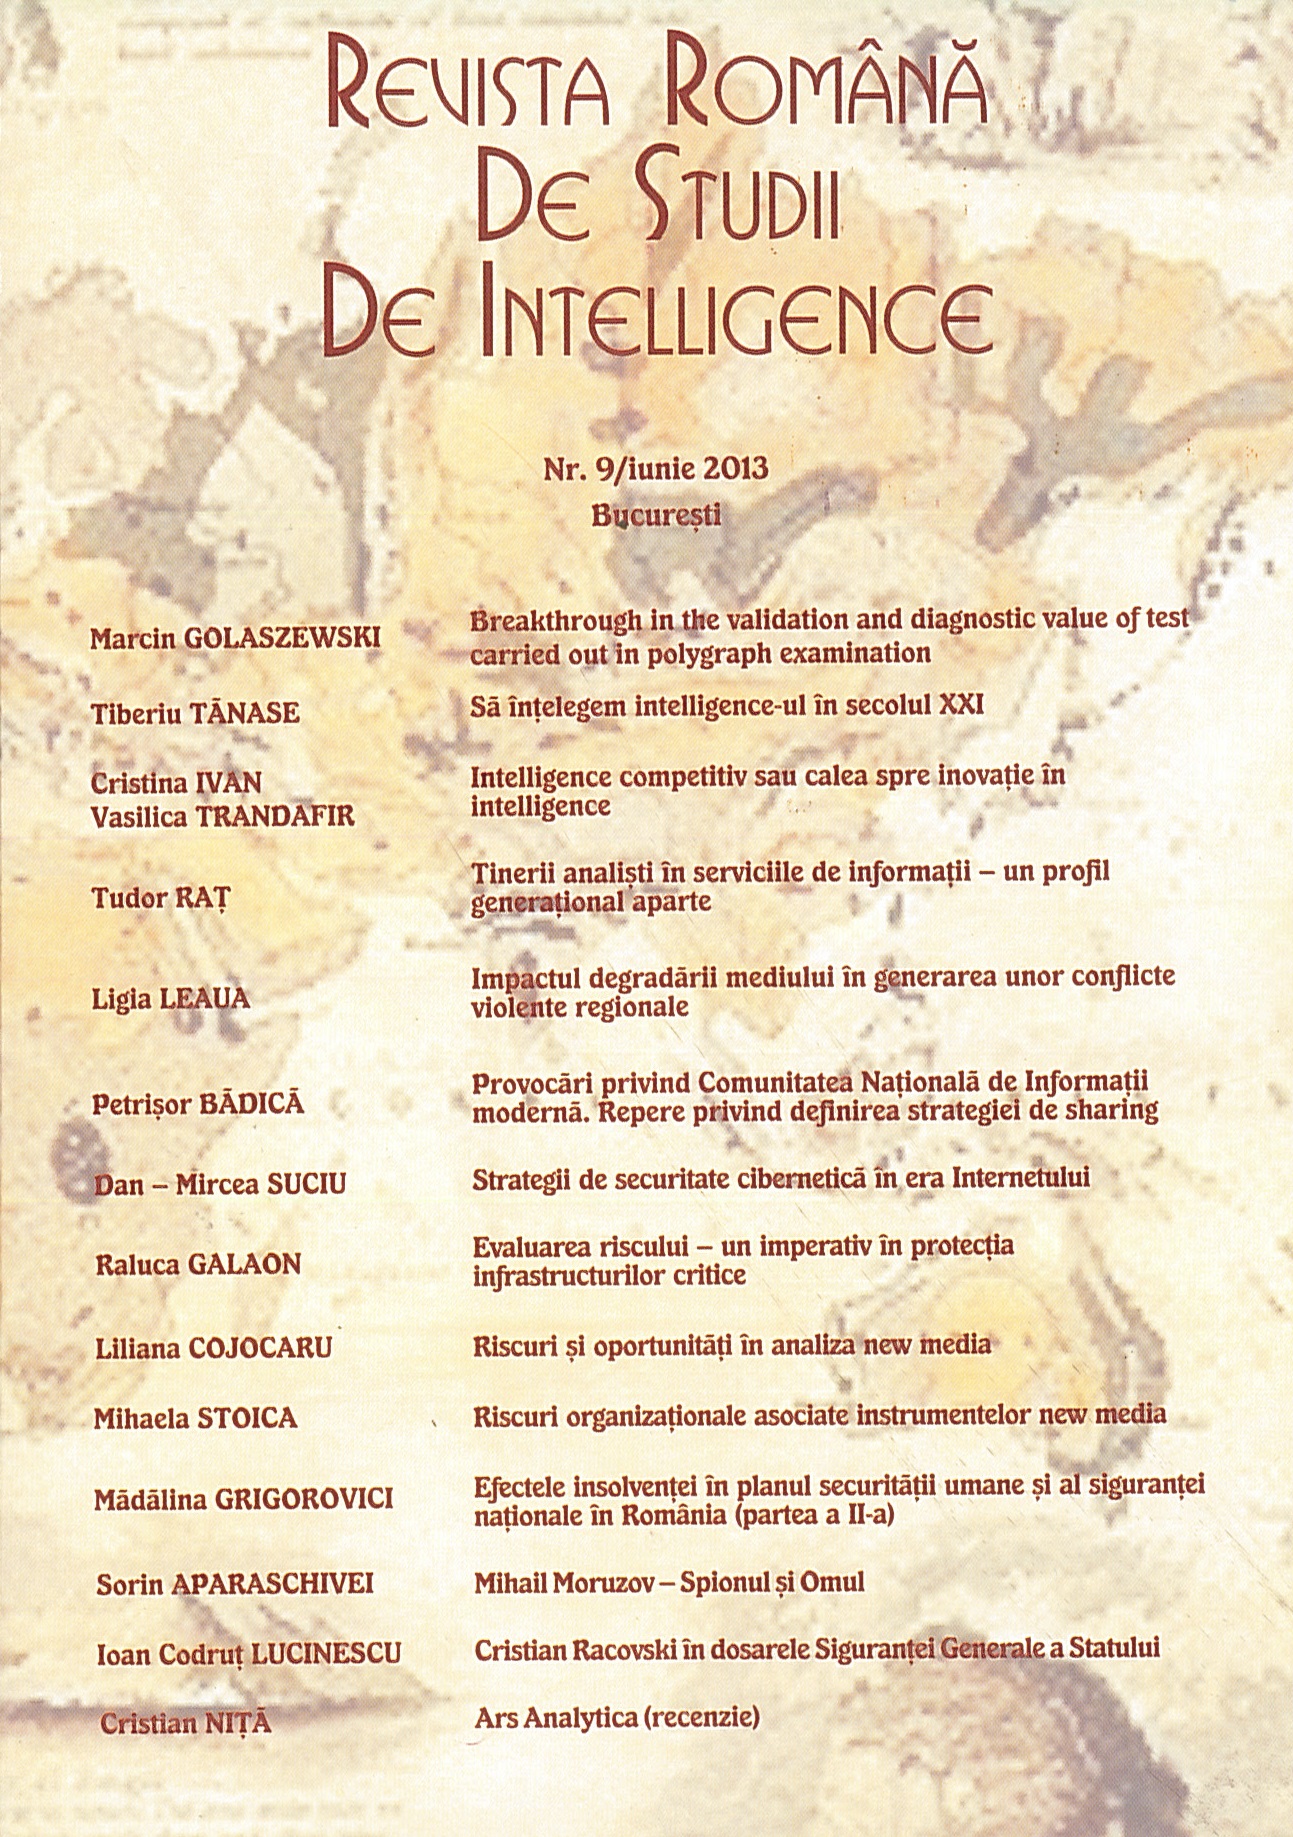 The young analysis in intelligence services – A distinct generation profile Cover Image